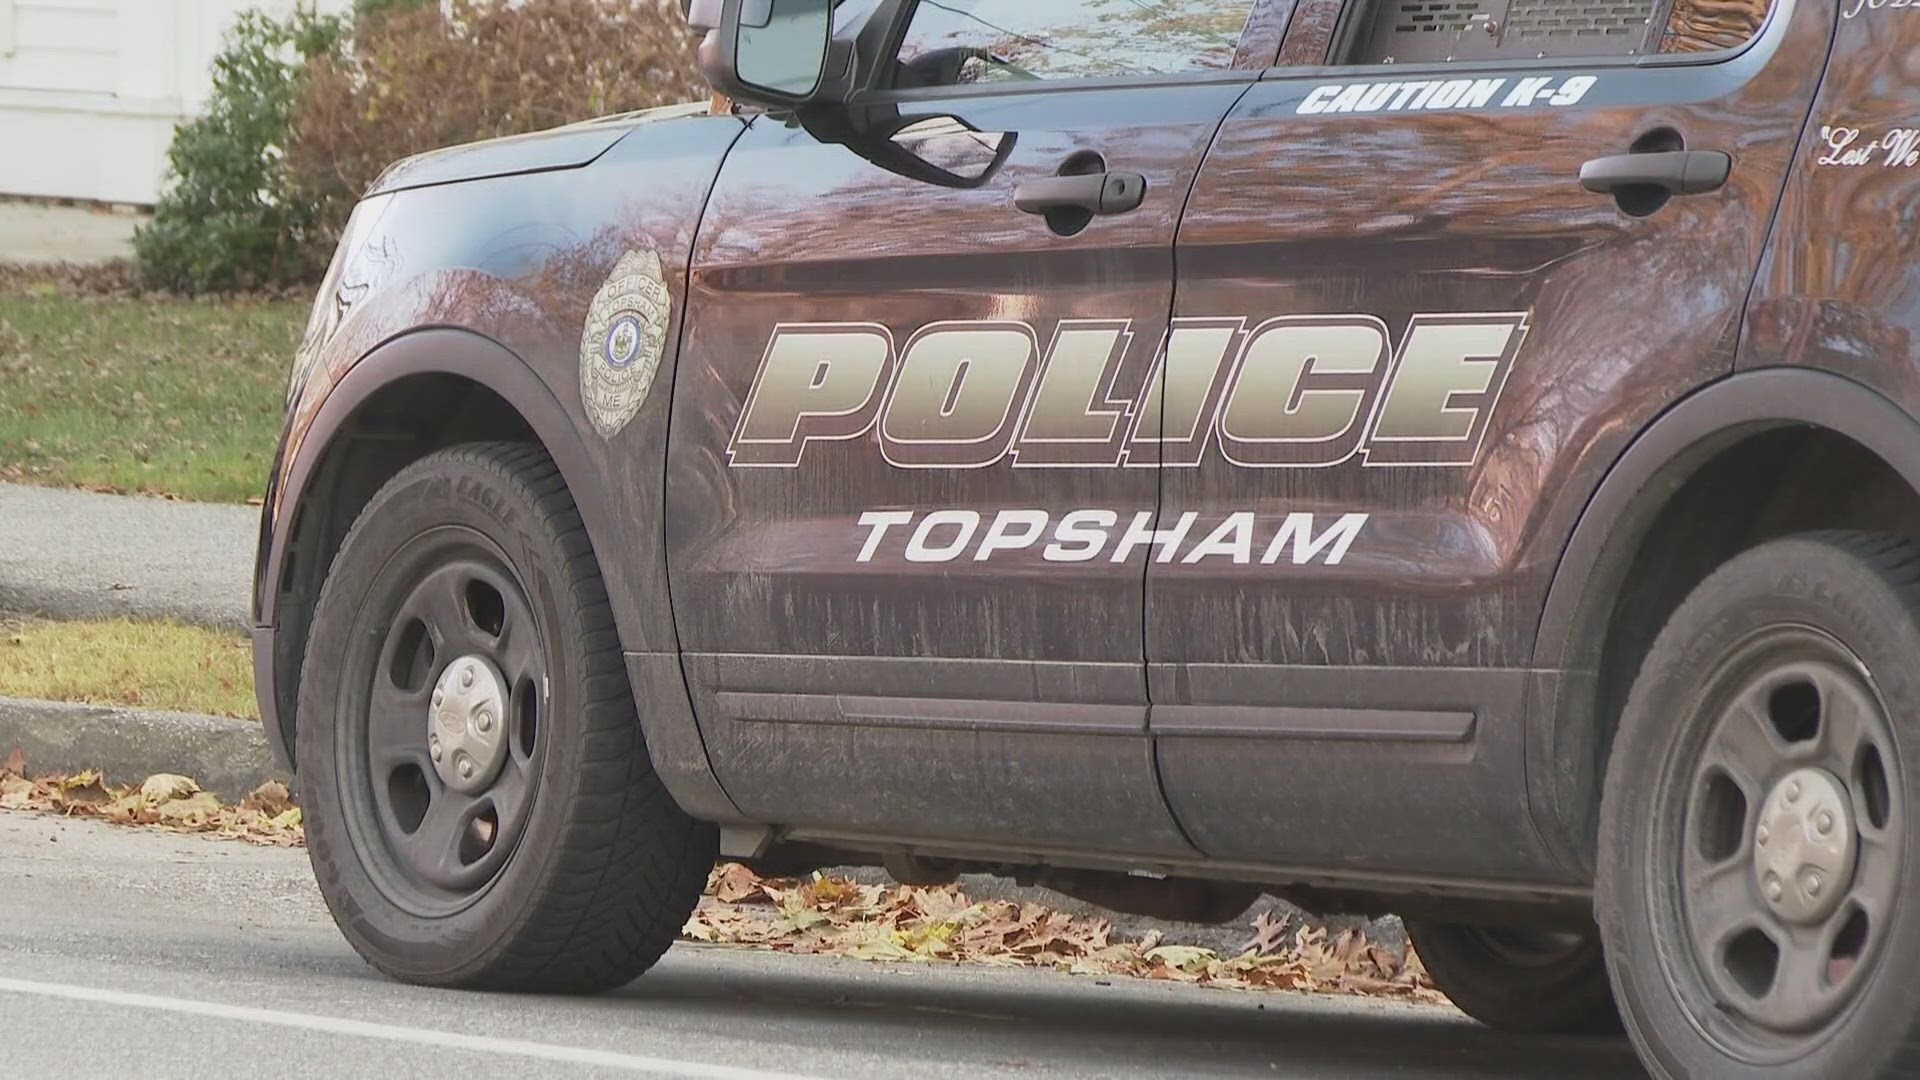 First responders found one person dead, and another person of interest was taken into custody a short time later, Topsham police said in a release.